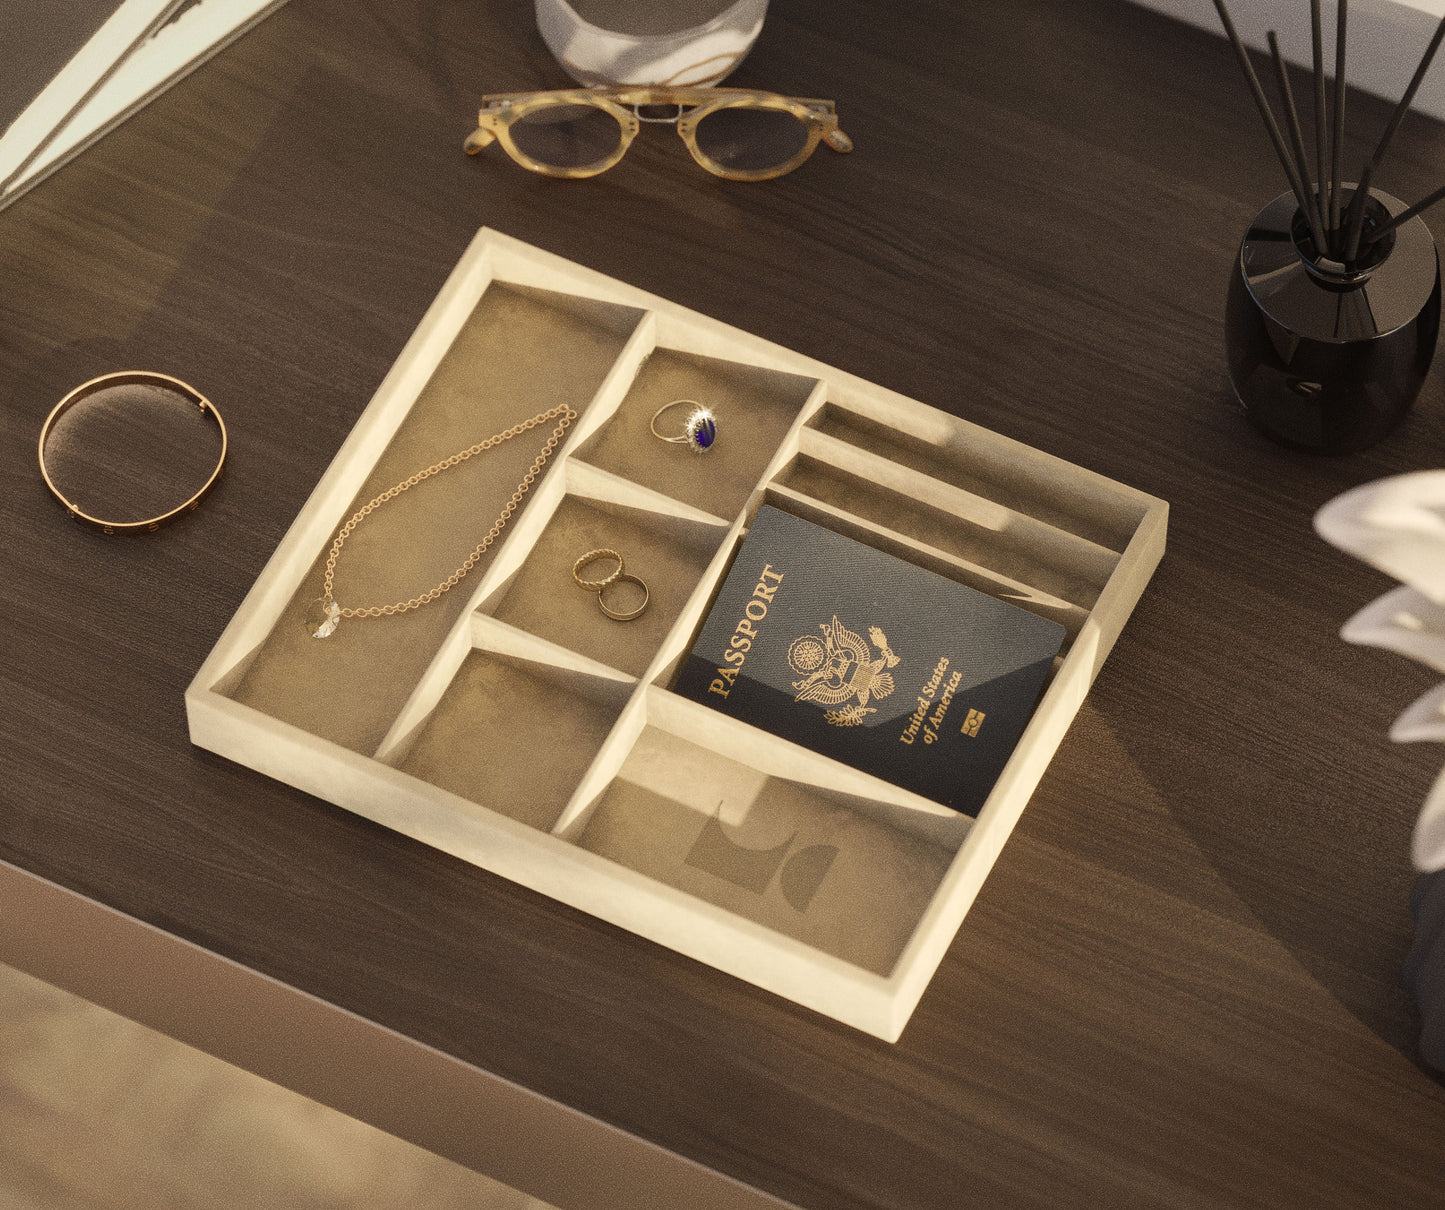 A lifestyle shot of an angled beige 7 Mix Tray containing jewelry and a passport sitting on an office desk